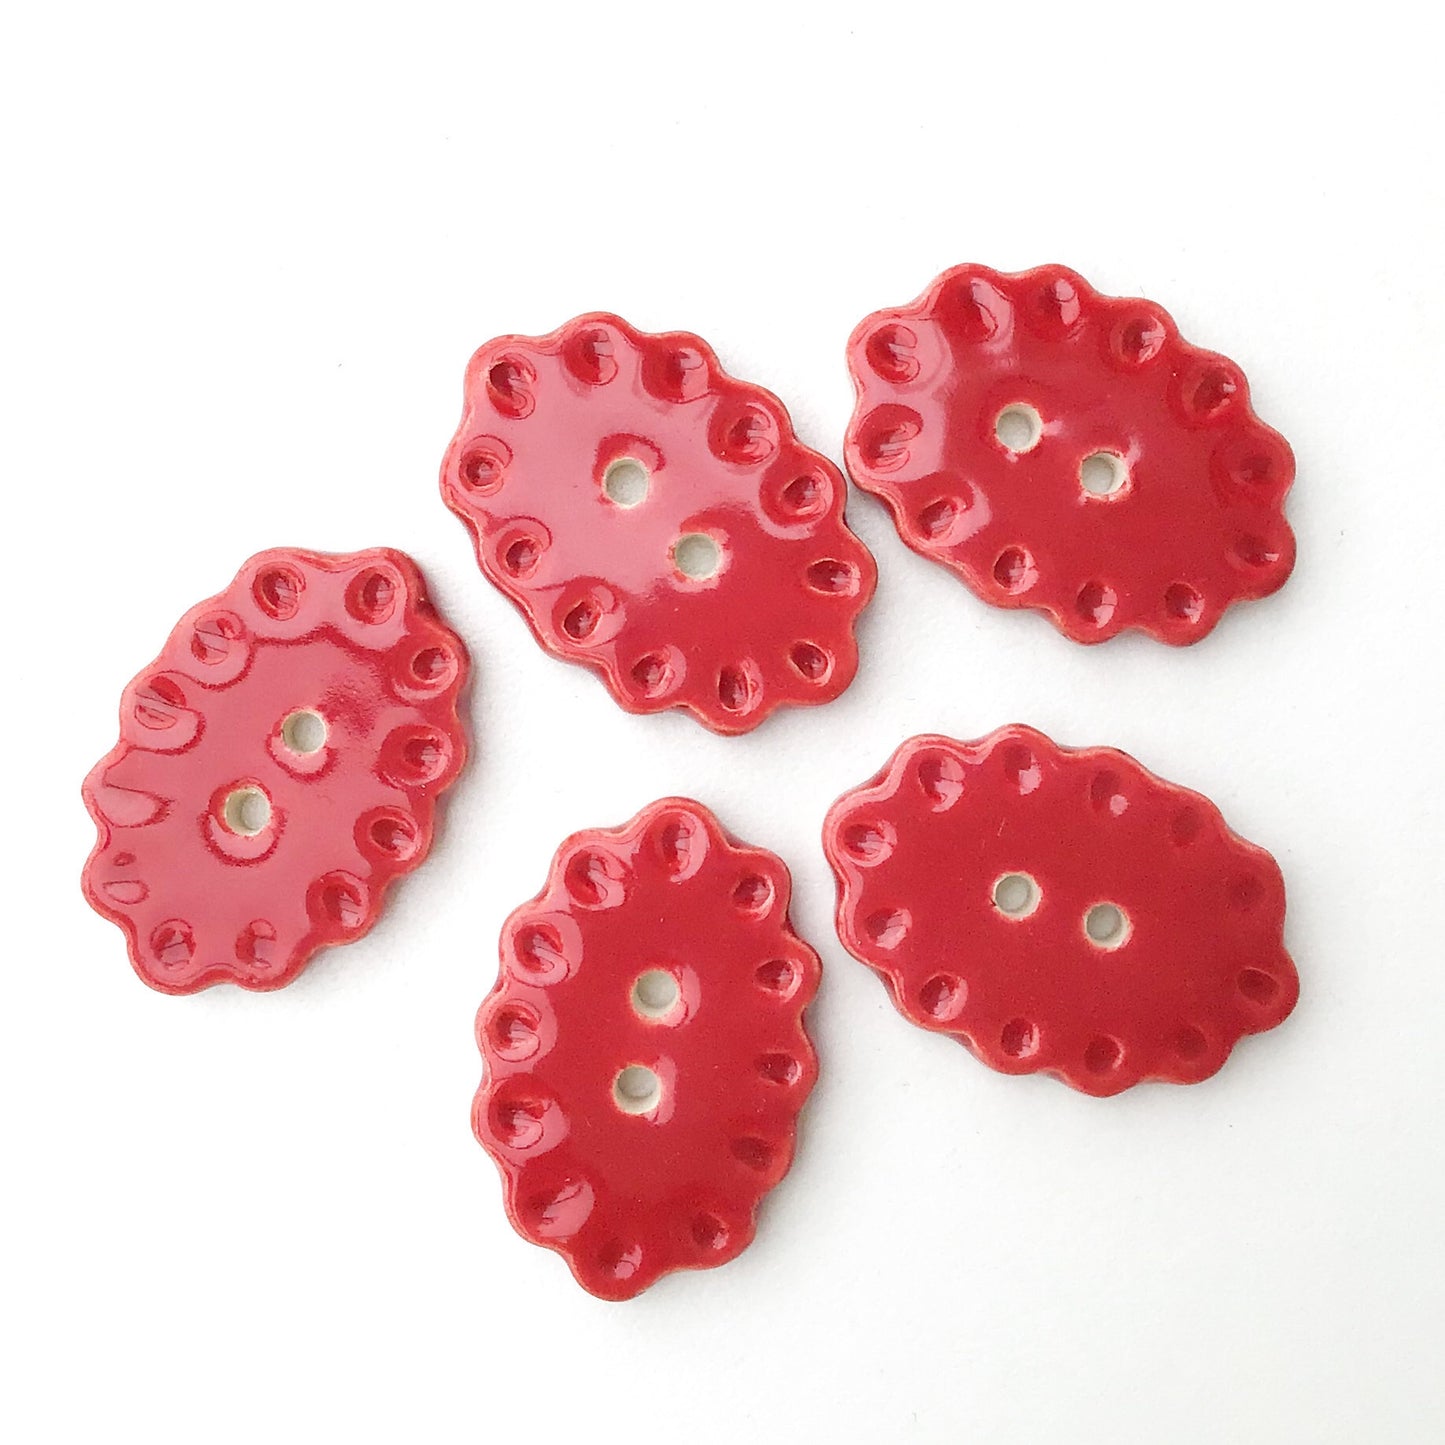 Scalloped Red Ceramic Buttons  3/4" x 1-1/16" - 5 Pack